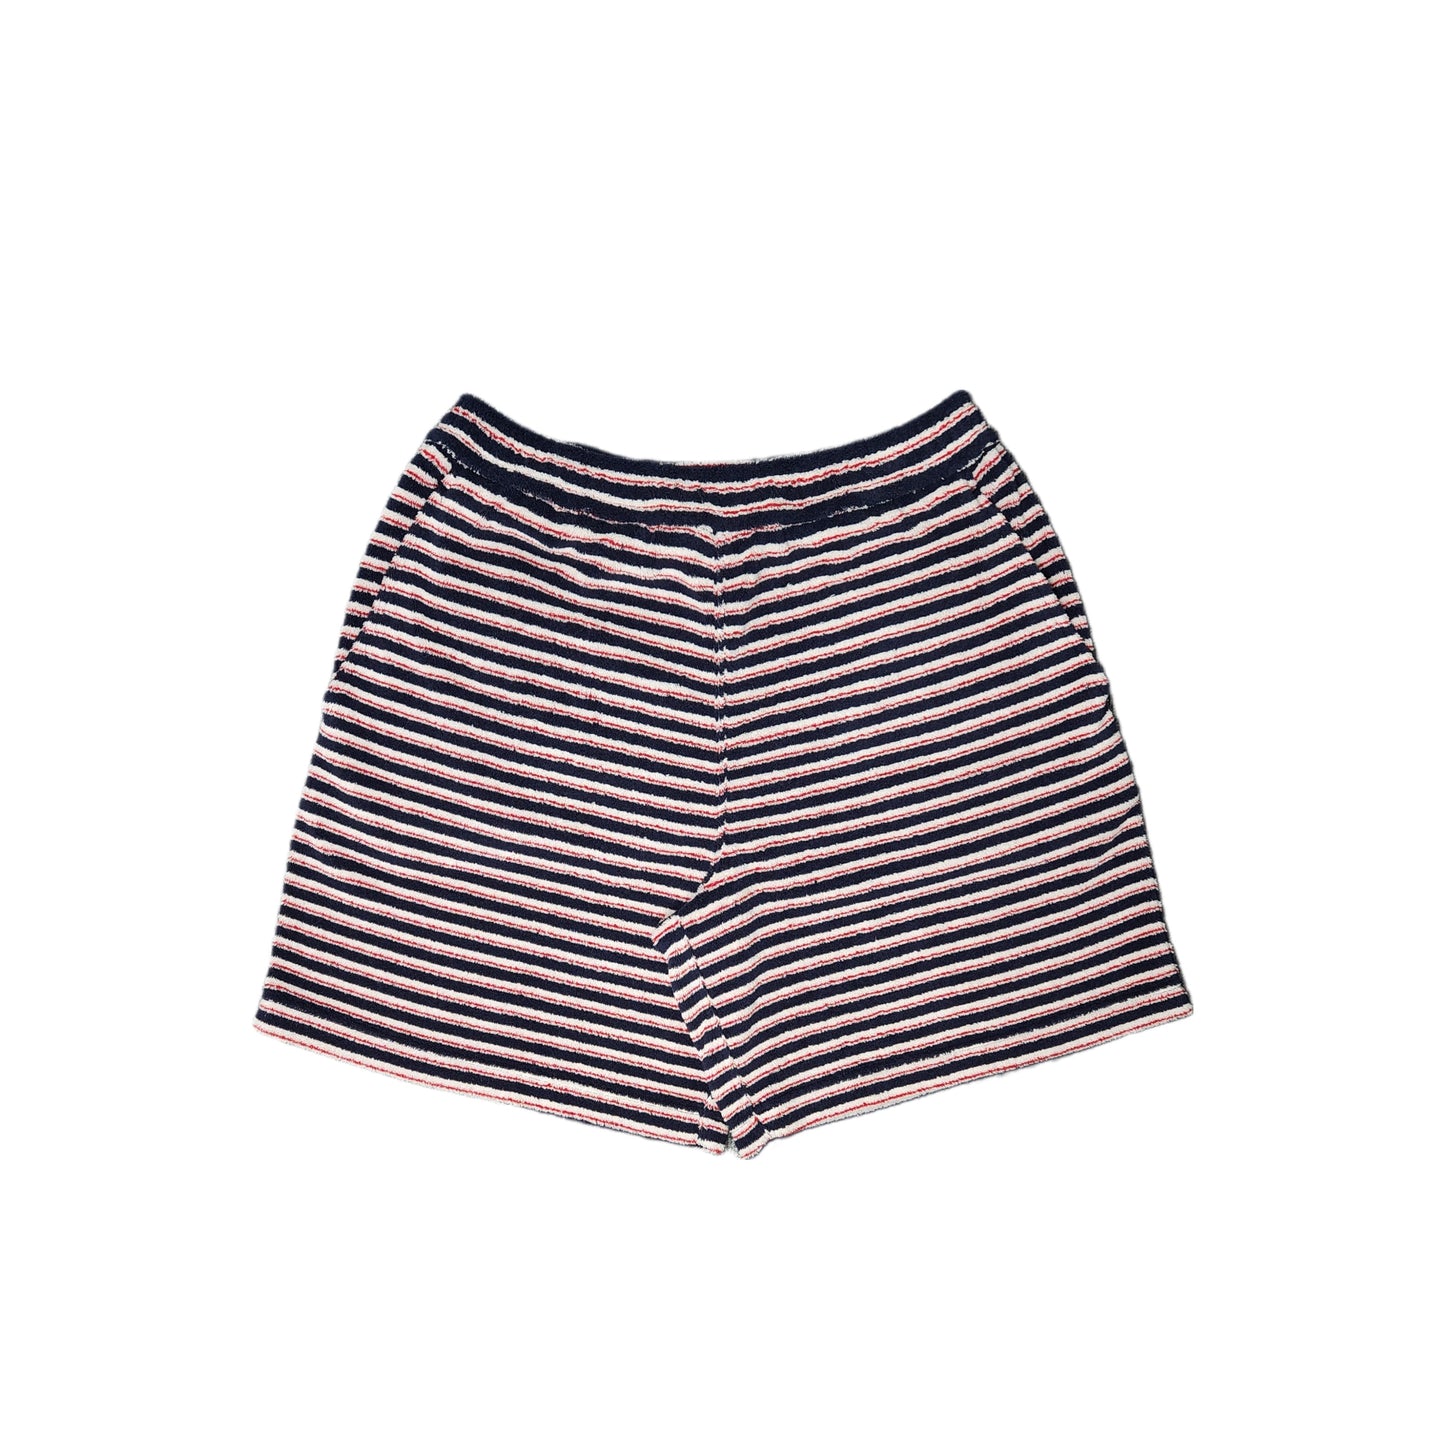 RED AND BLUE STRIPED TERRY SHORT PANTS